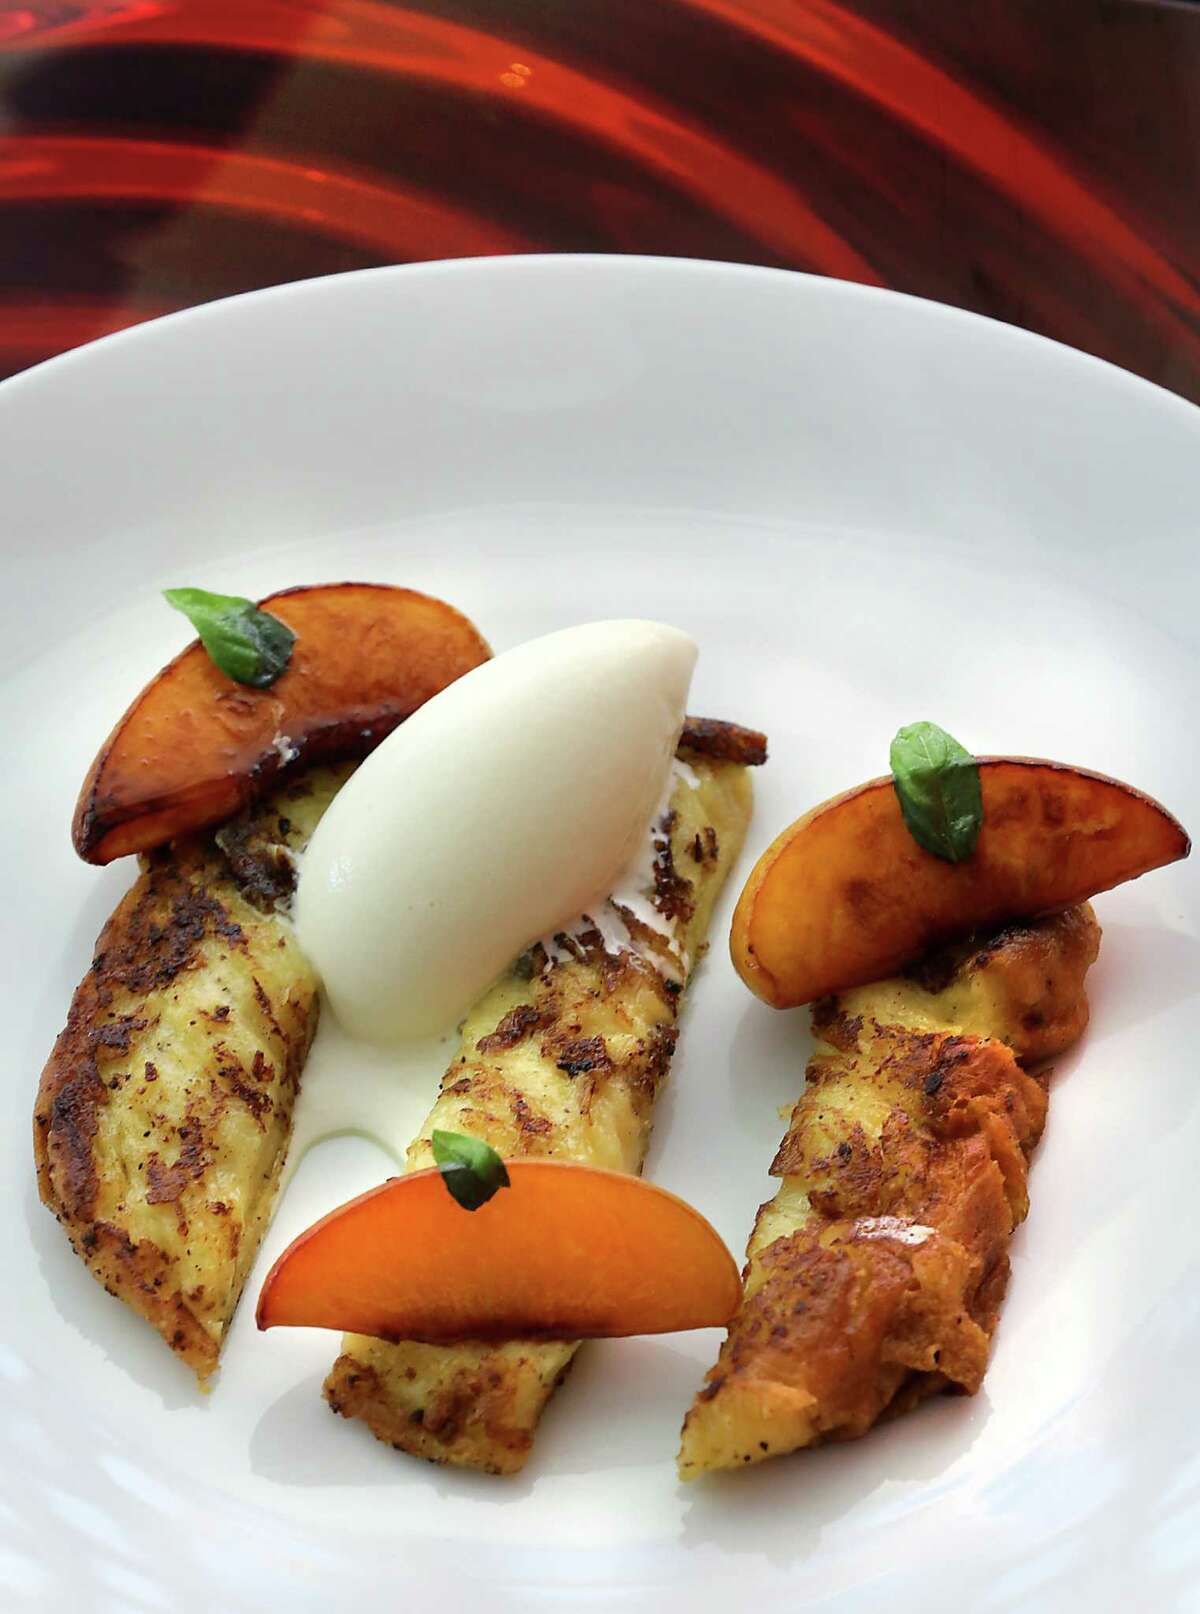 Brioche French Toast with Honey Roasted Peaches and Basil Ice Cream at Saveurs 209